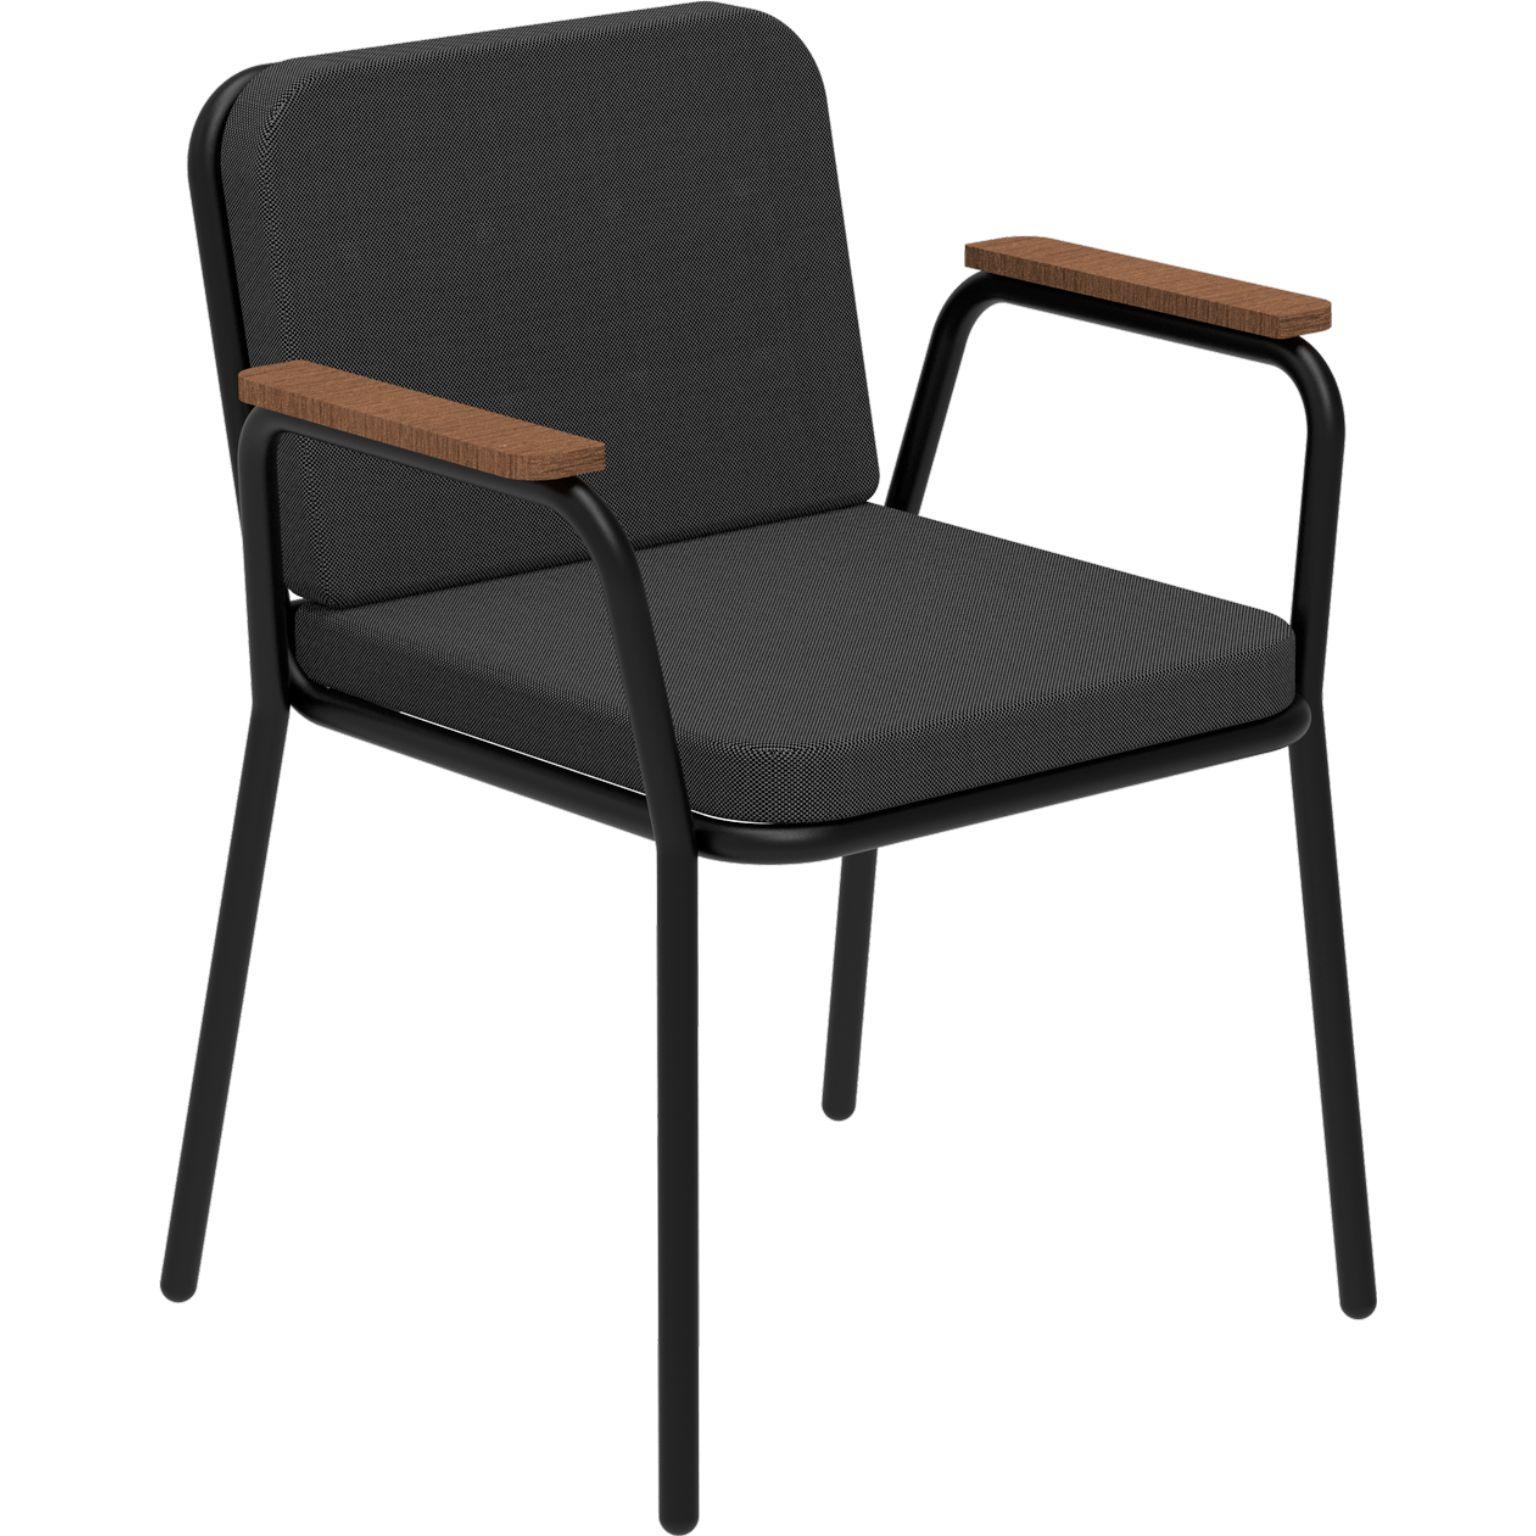 Nature Black Armchair by MOWEE
Dimensions: D60 x W67 x H83 cm (seat height 42 cm).
Material: Aluminum, upholstery and Iroko Wood.
Weight: 5 kg.
Also available in different colors and finishes. Please contact us.

An unmistakable collection for